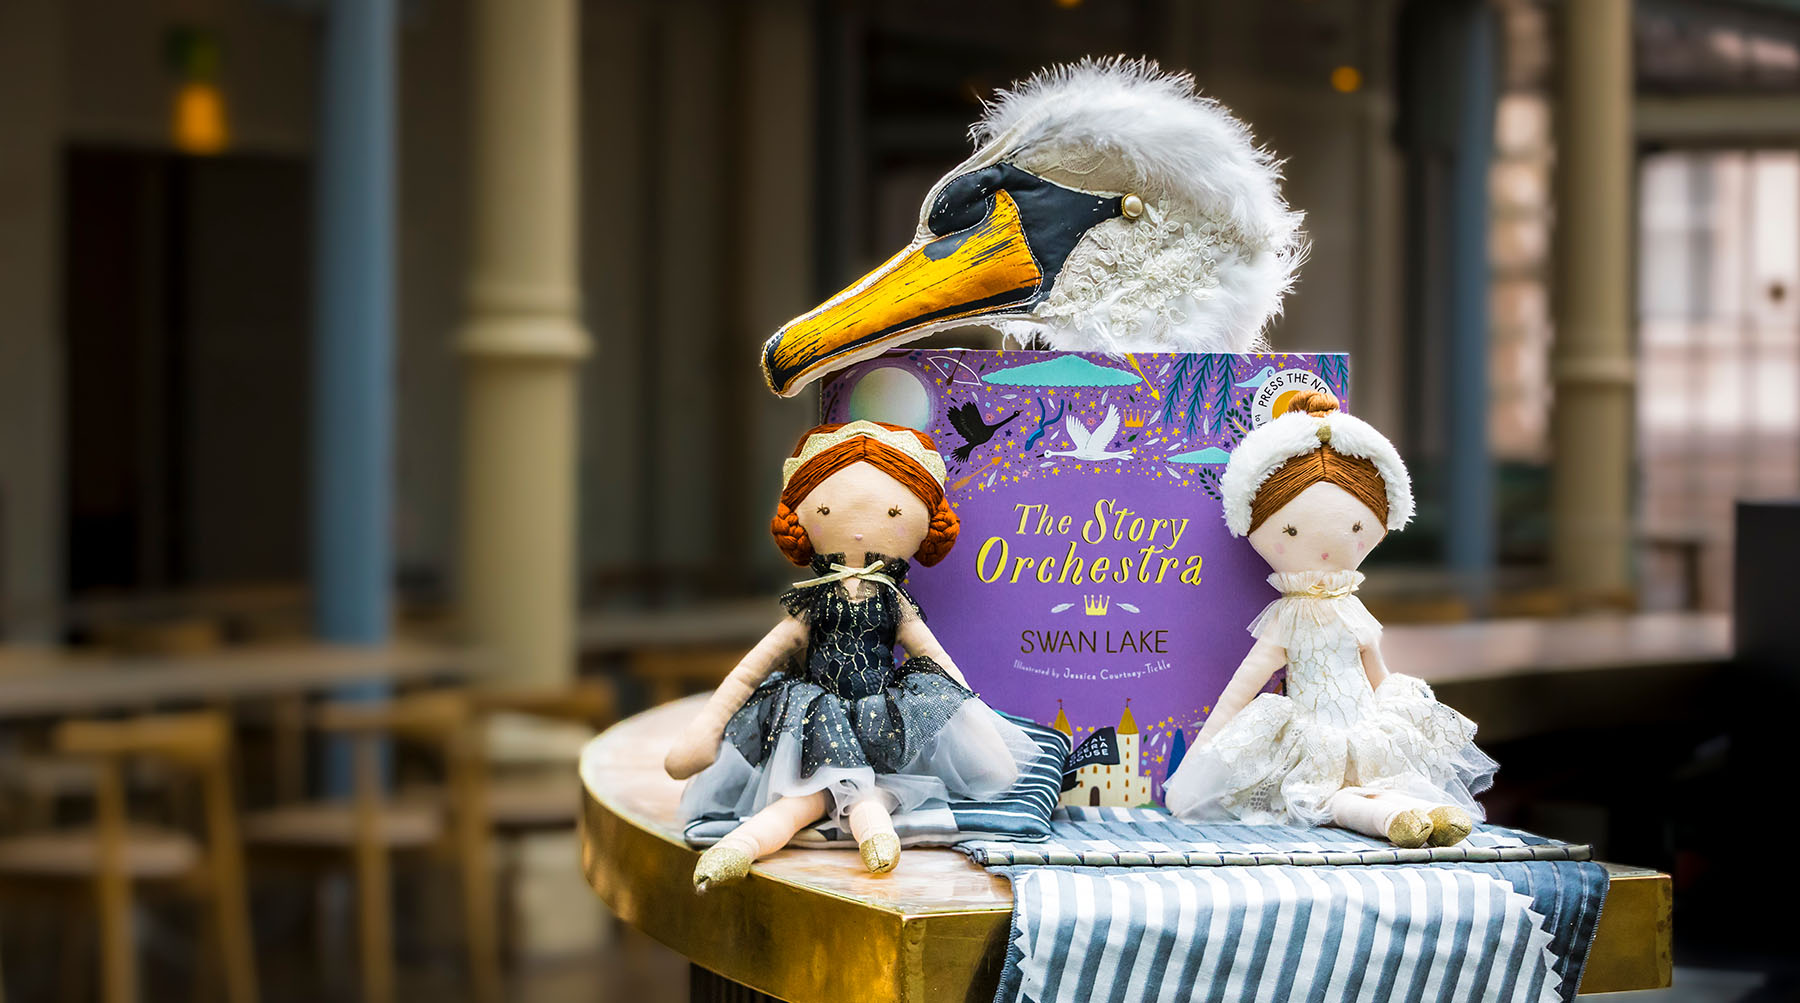 Two dolls dressed as the black and white swan sit on a round table propped up against a purple picture book.